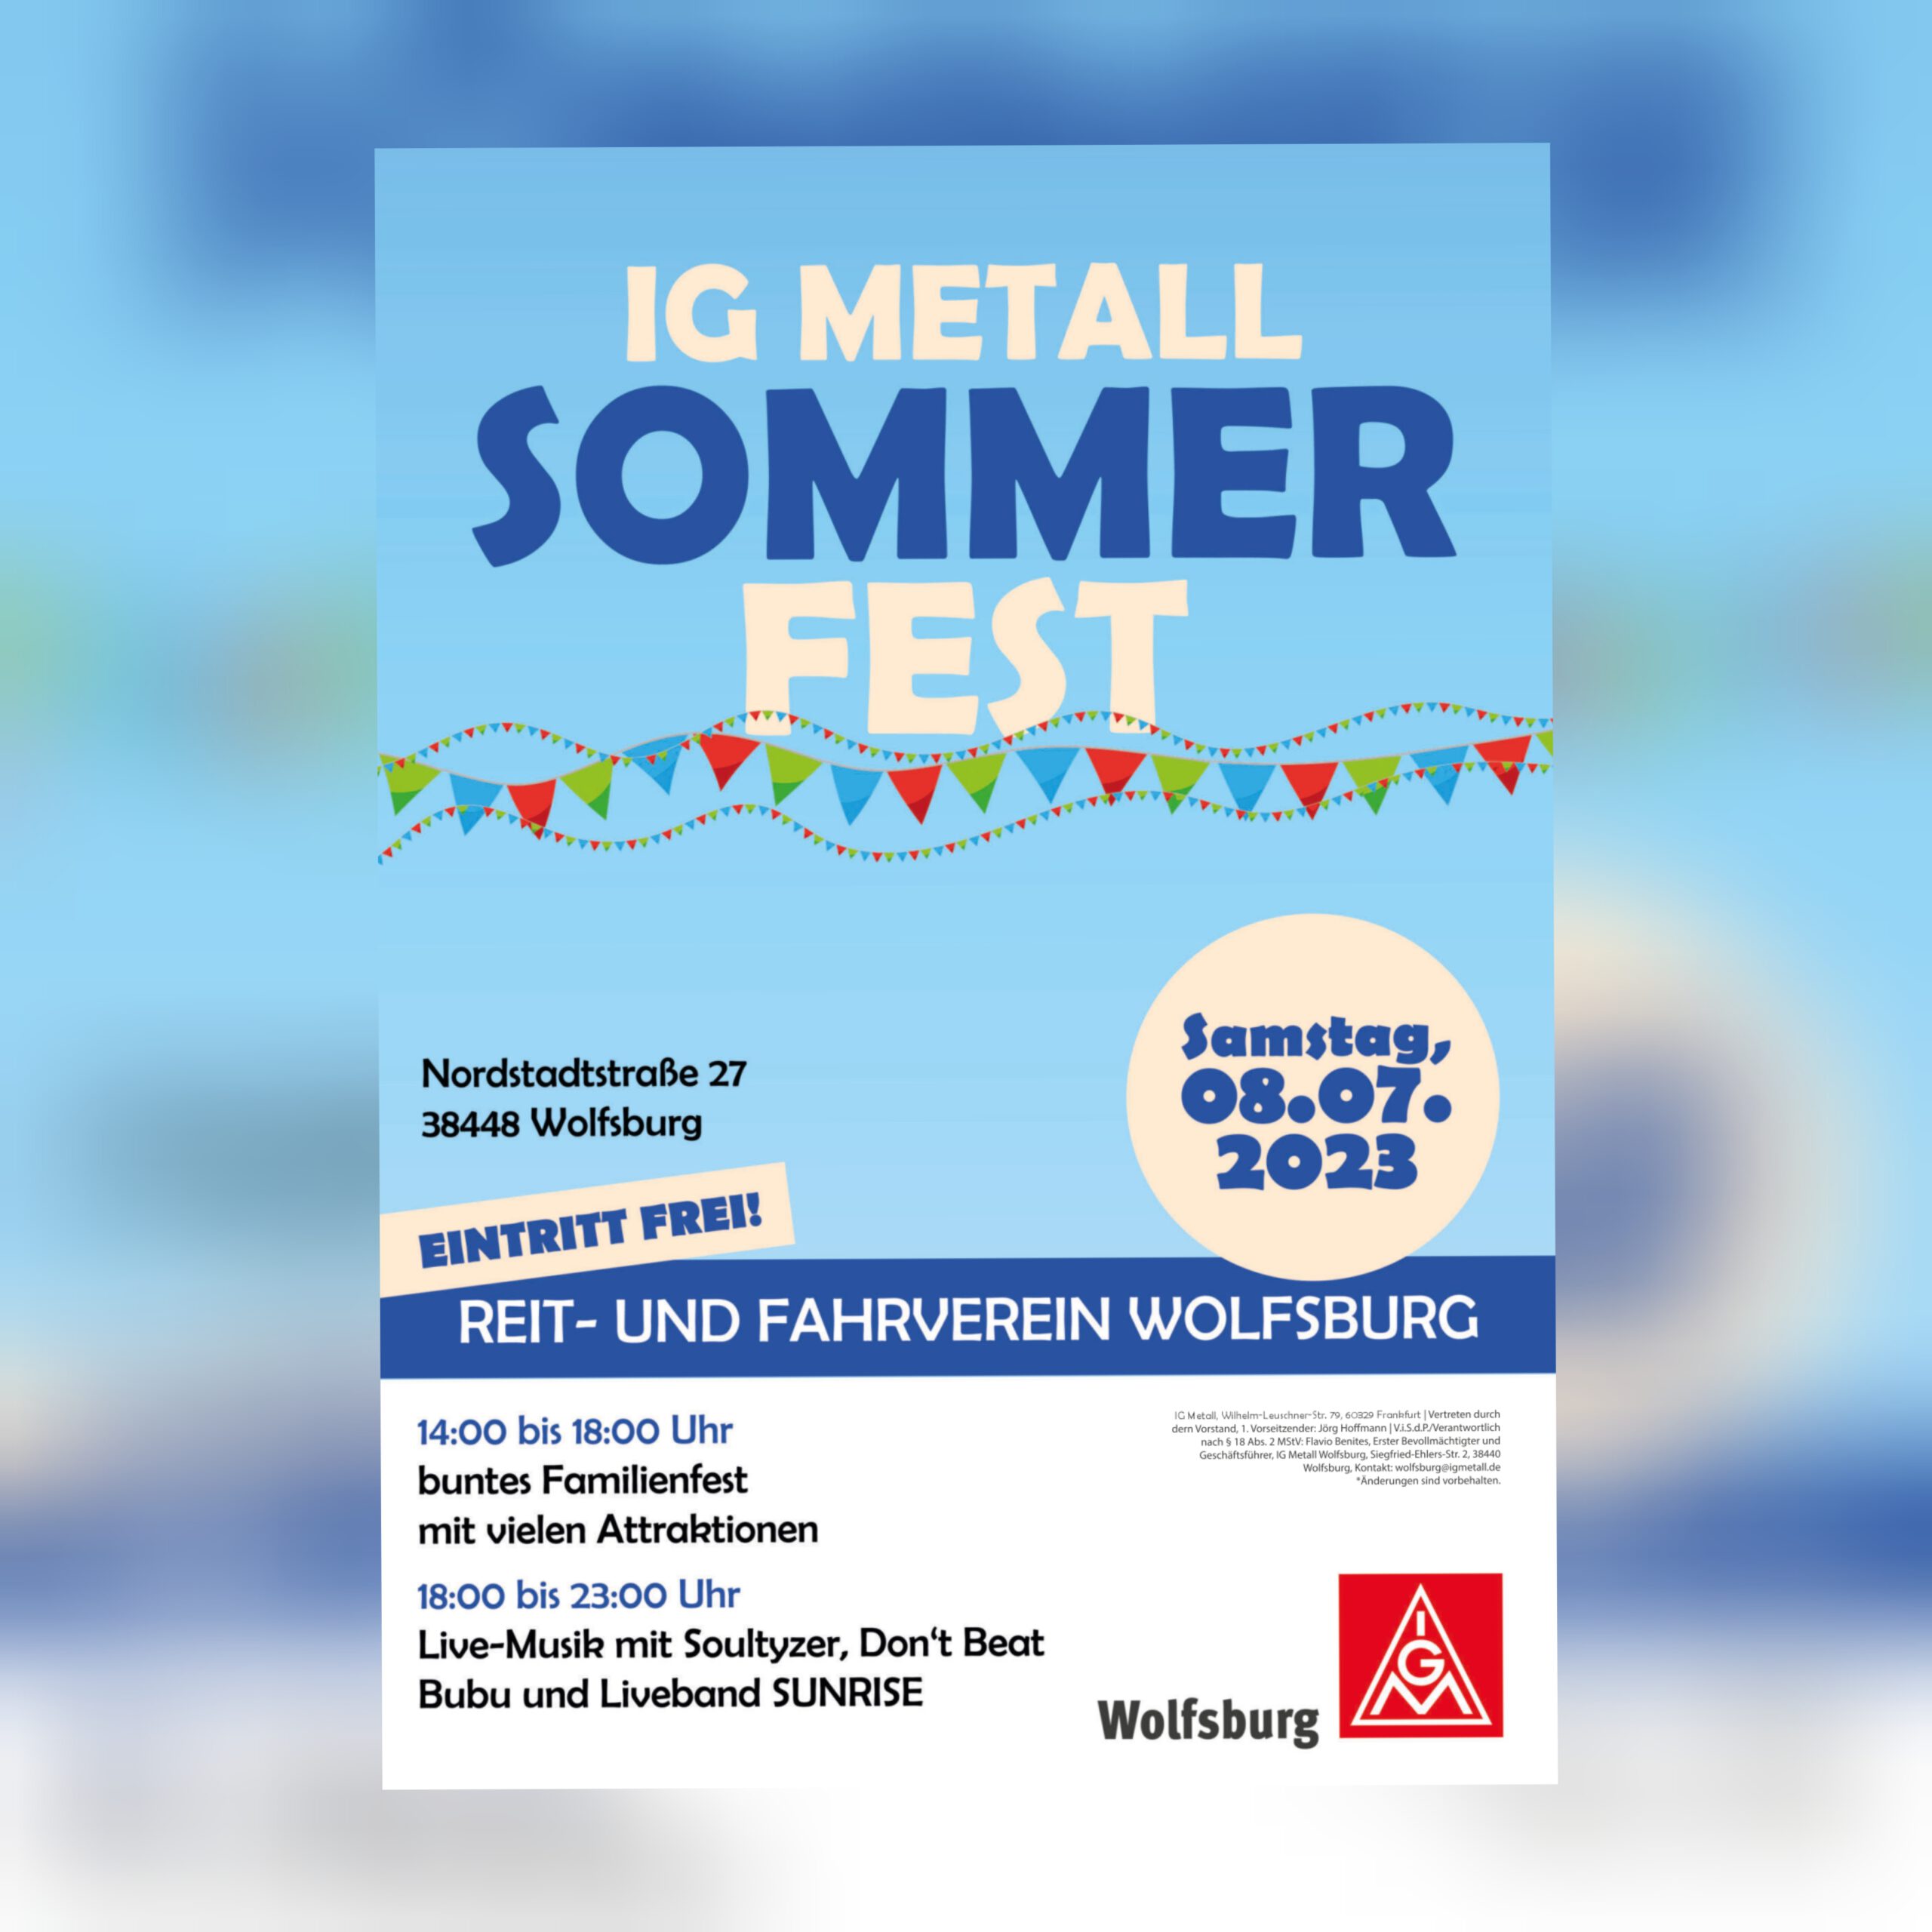 IG Metall summer party on July 8 in Wolfsburg